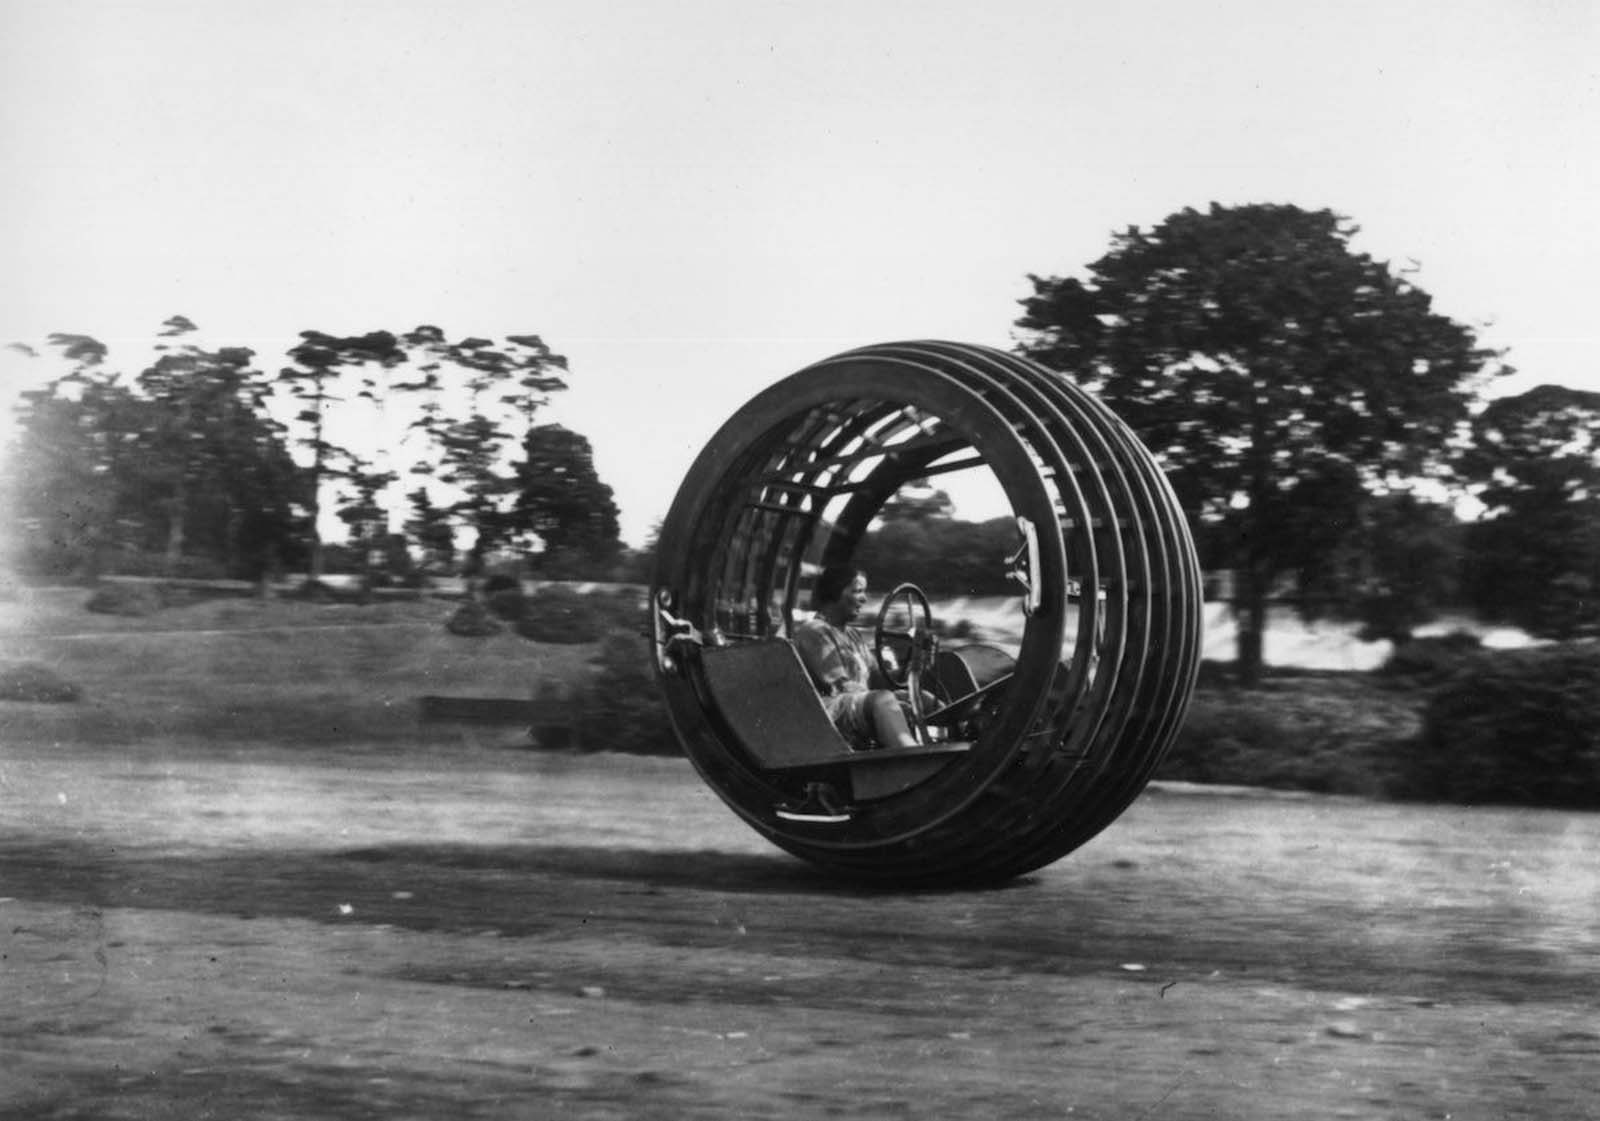 A Dynasphere being demonstrated at Brooklands race track, Surrey, England, 1932.